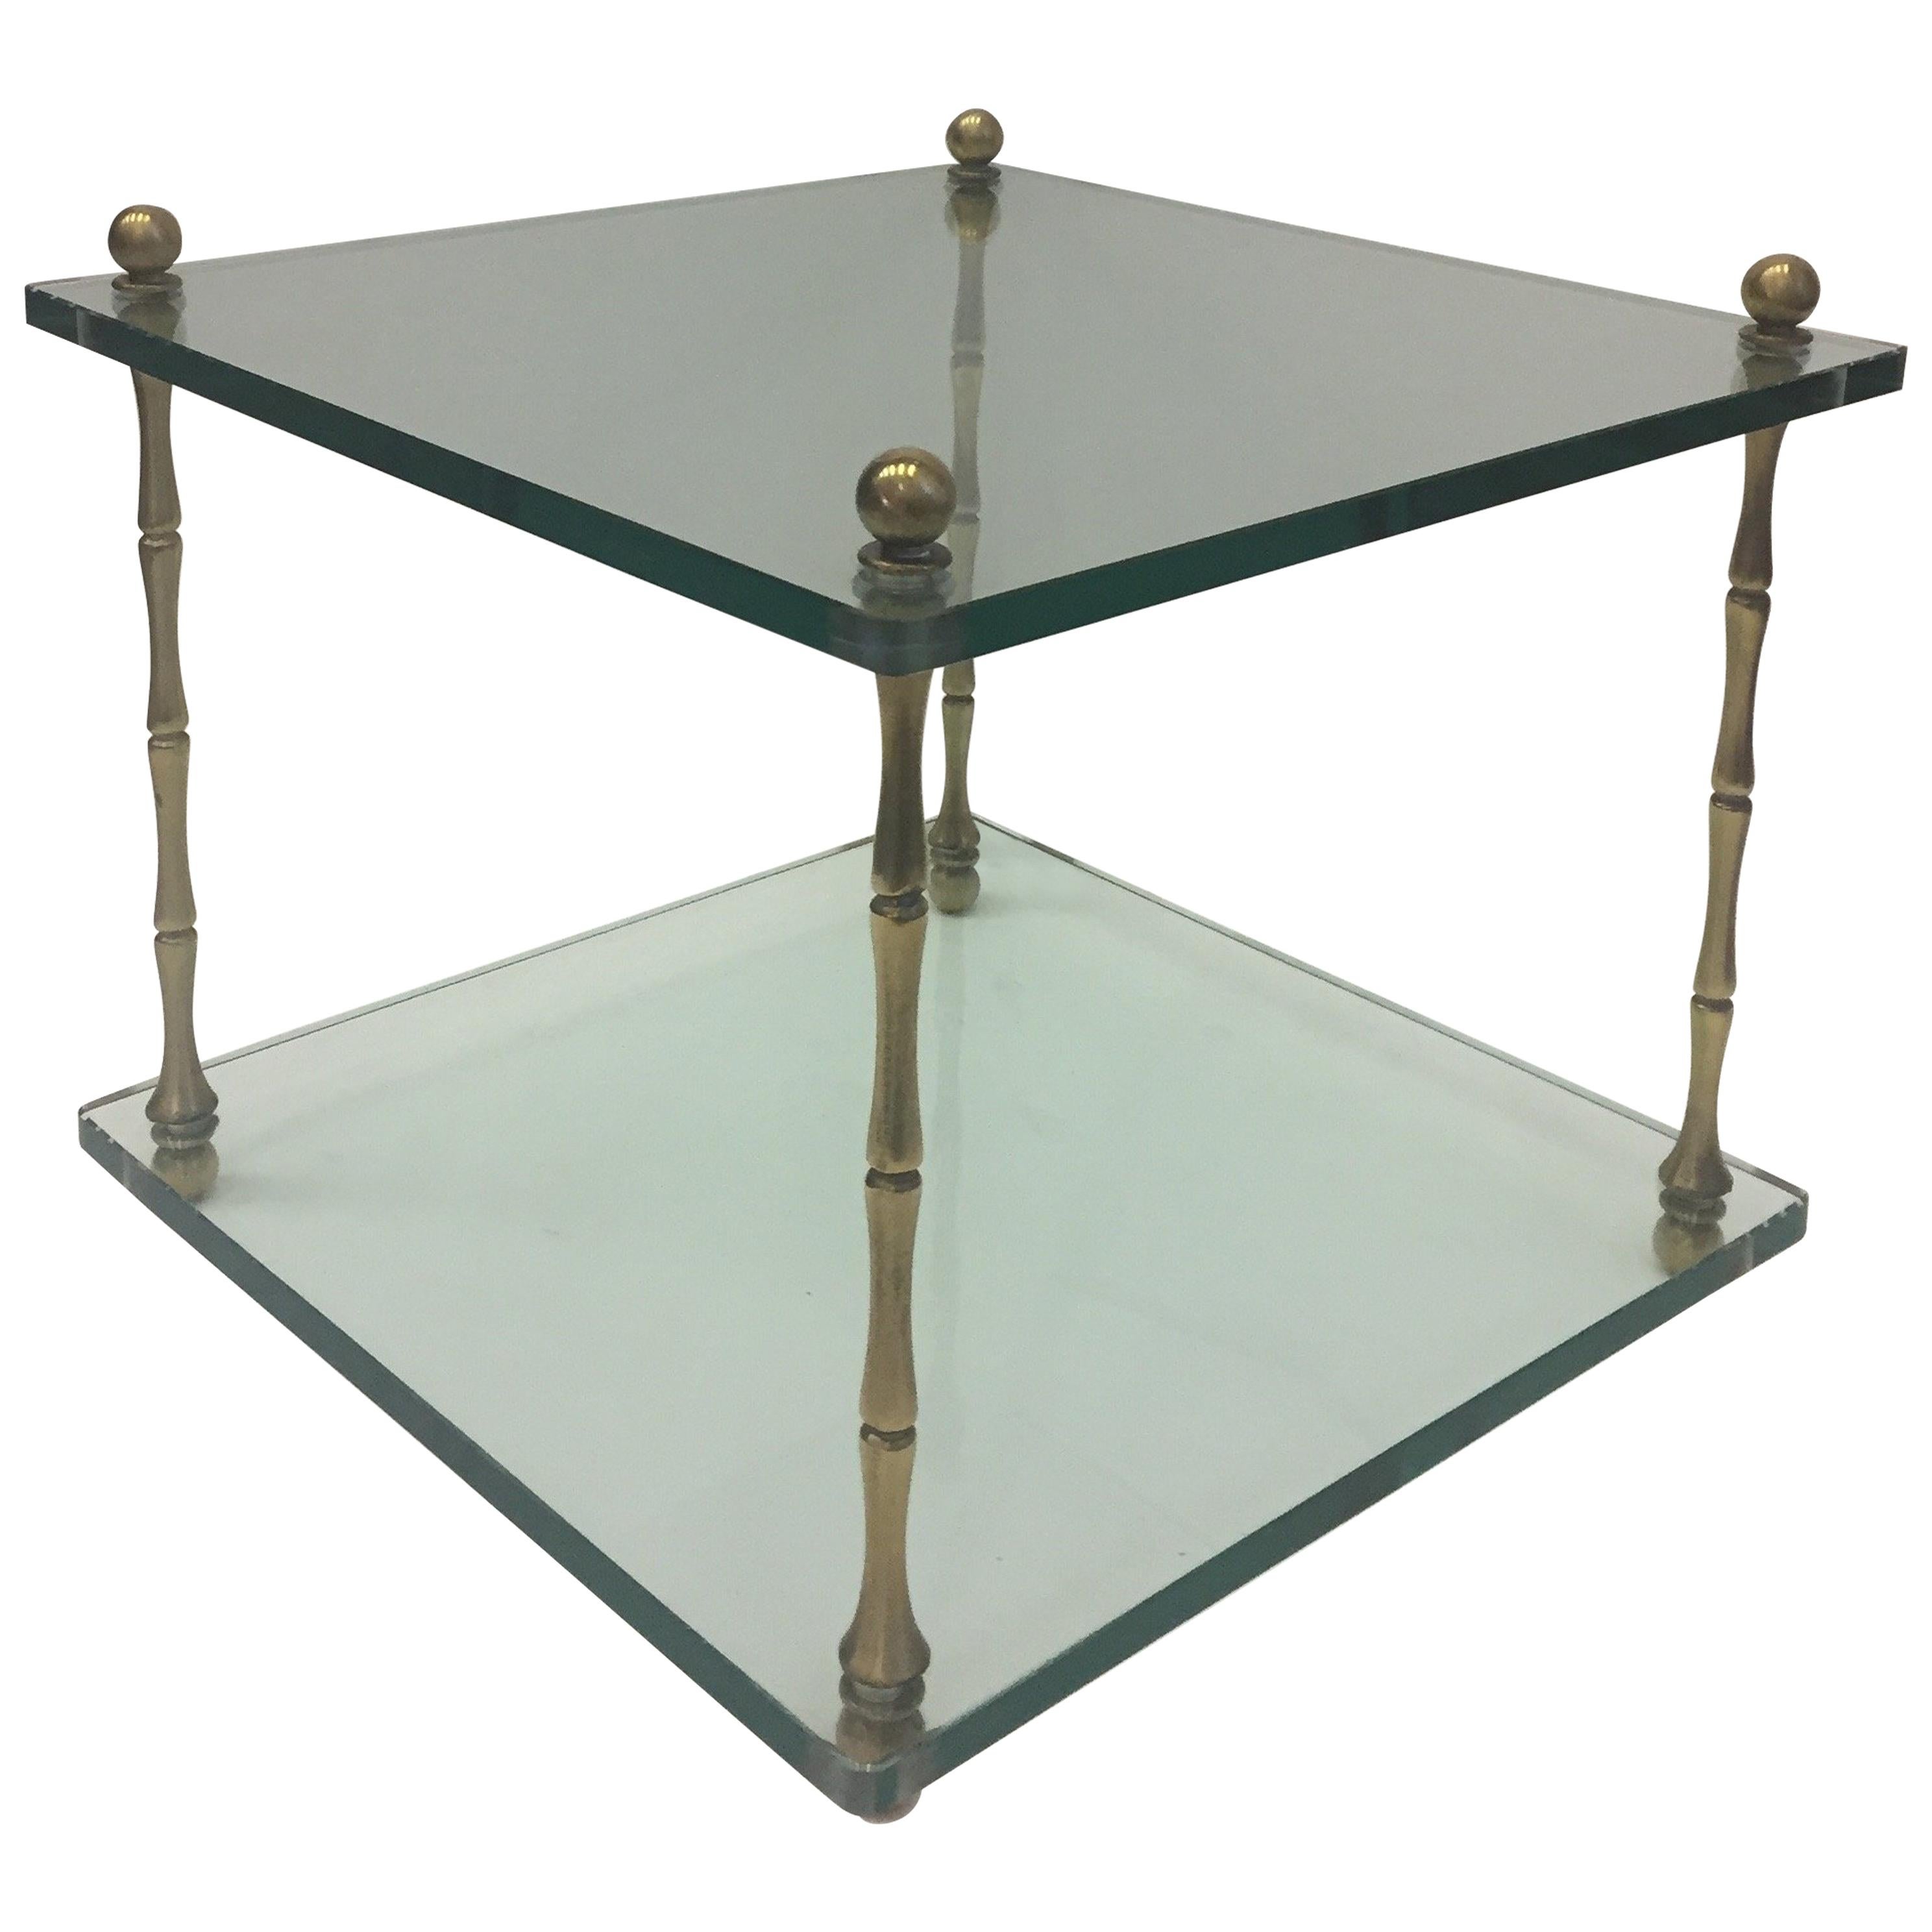 Stylish Mid-Century Modern Two-Tier Glass and Brass End Table by Baker